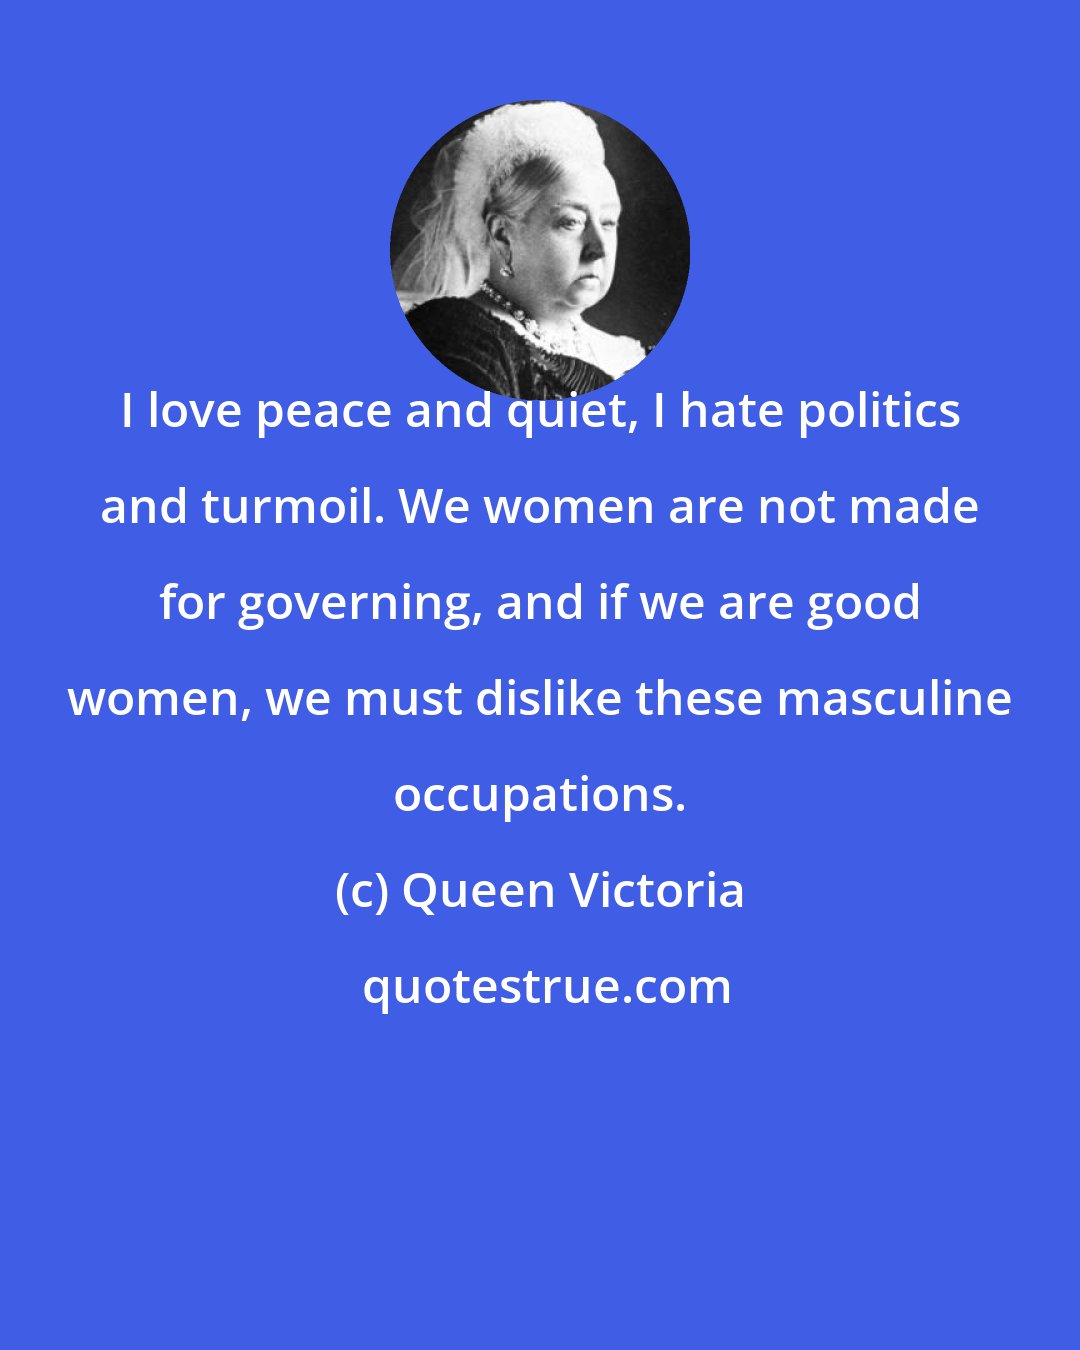 Queen Victoria: I love peace and quiet, I hate politics and turmoil. We women are not made for governing, and if we are good women, we must dislike these masculine occupations.